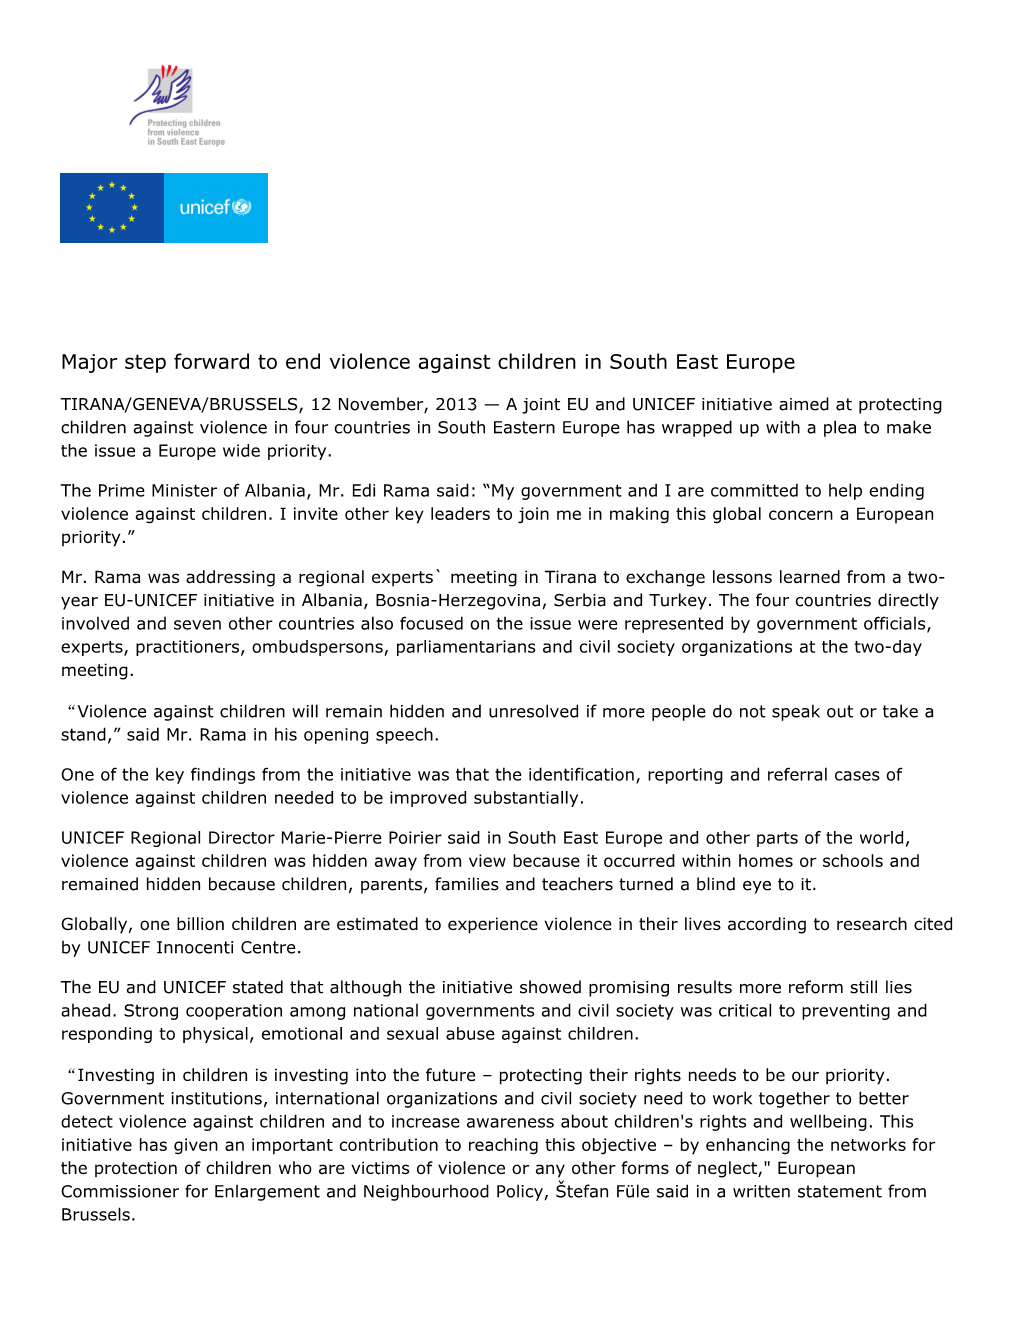 Major Step Forward to End Violence Against Children in South East Europe